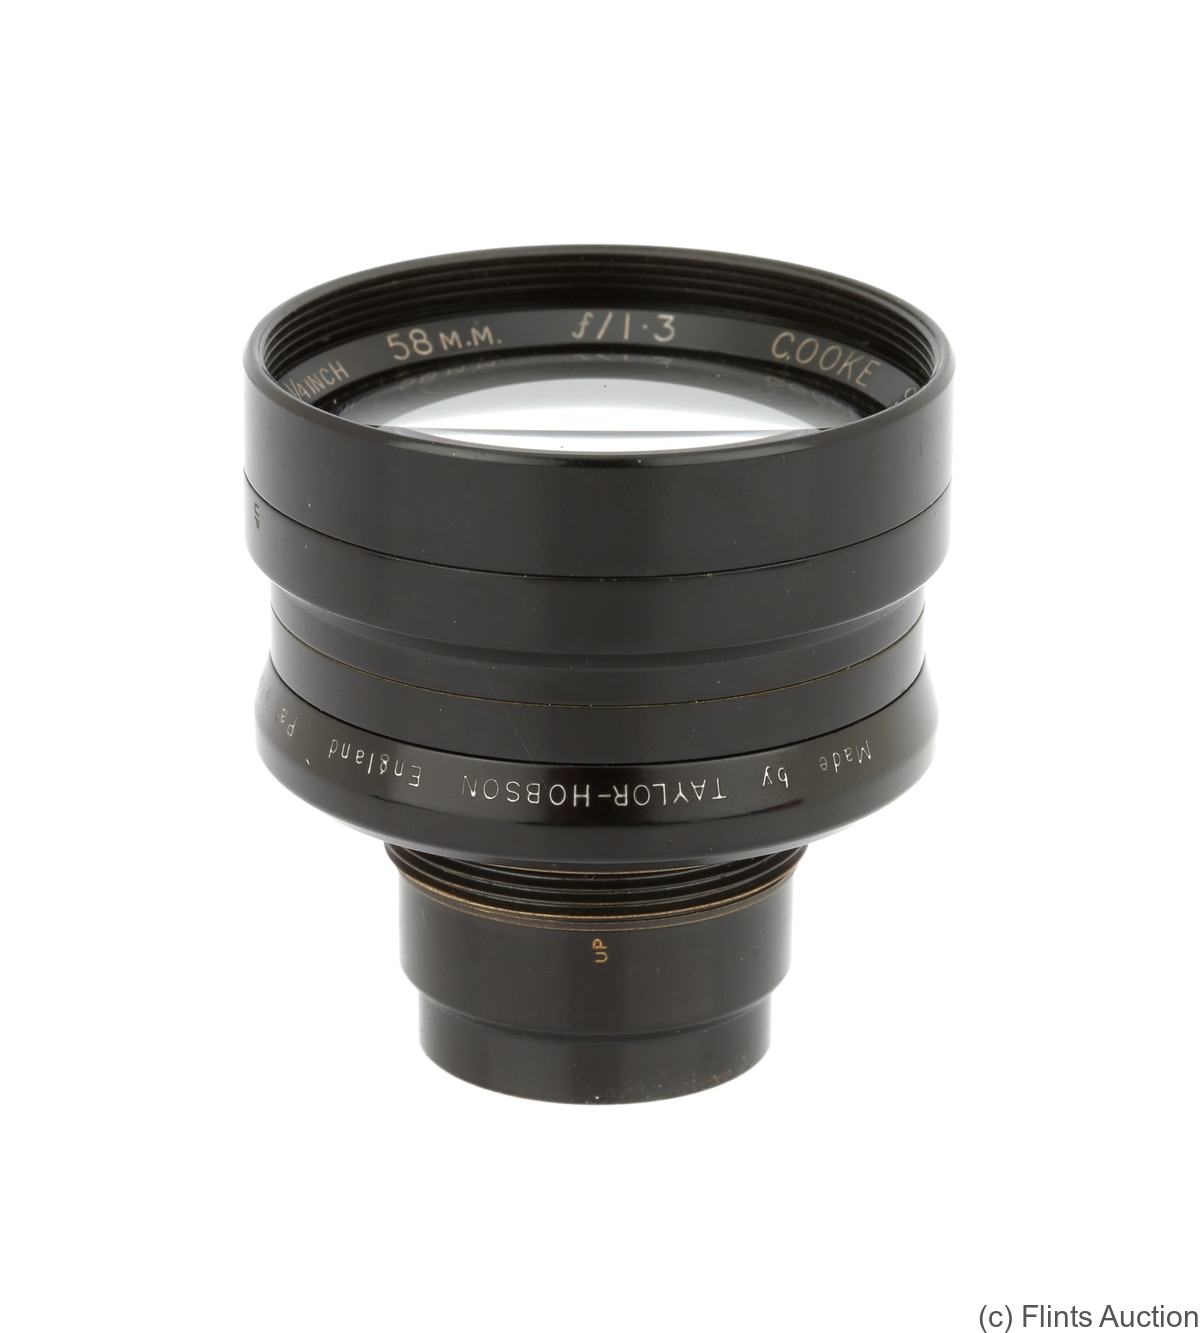 Taylor & Hobson: 58mm (5.8cm) f1.3 Cooke Speed Panchro camera